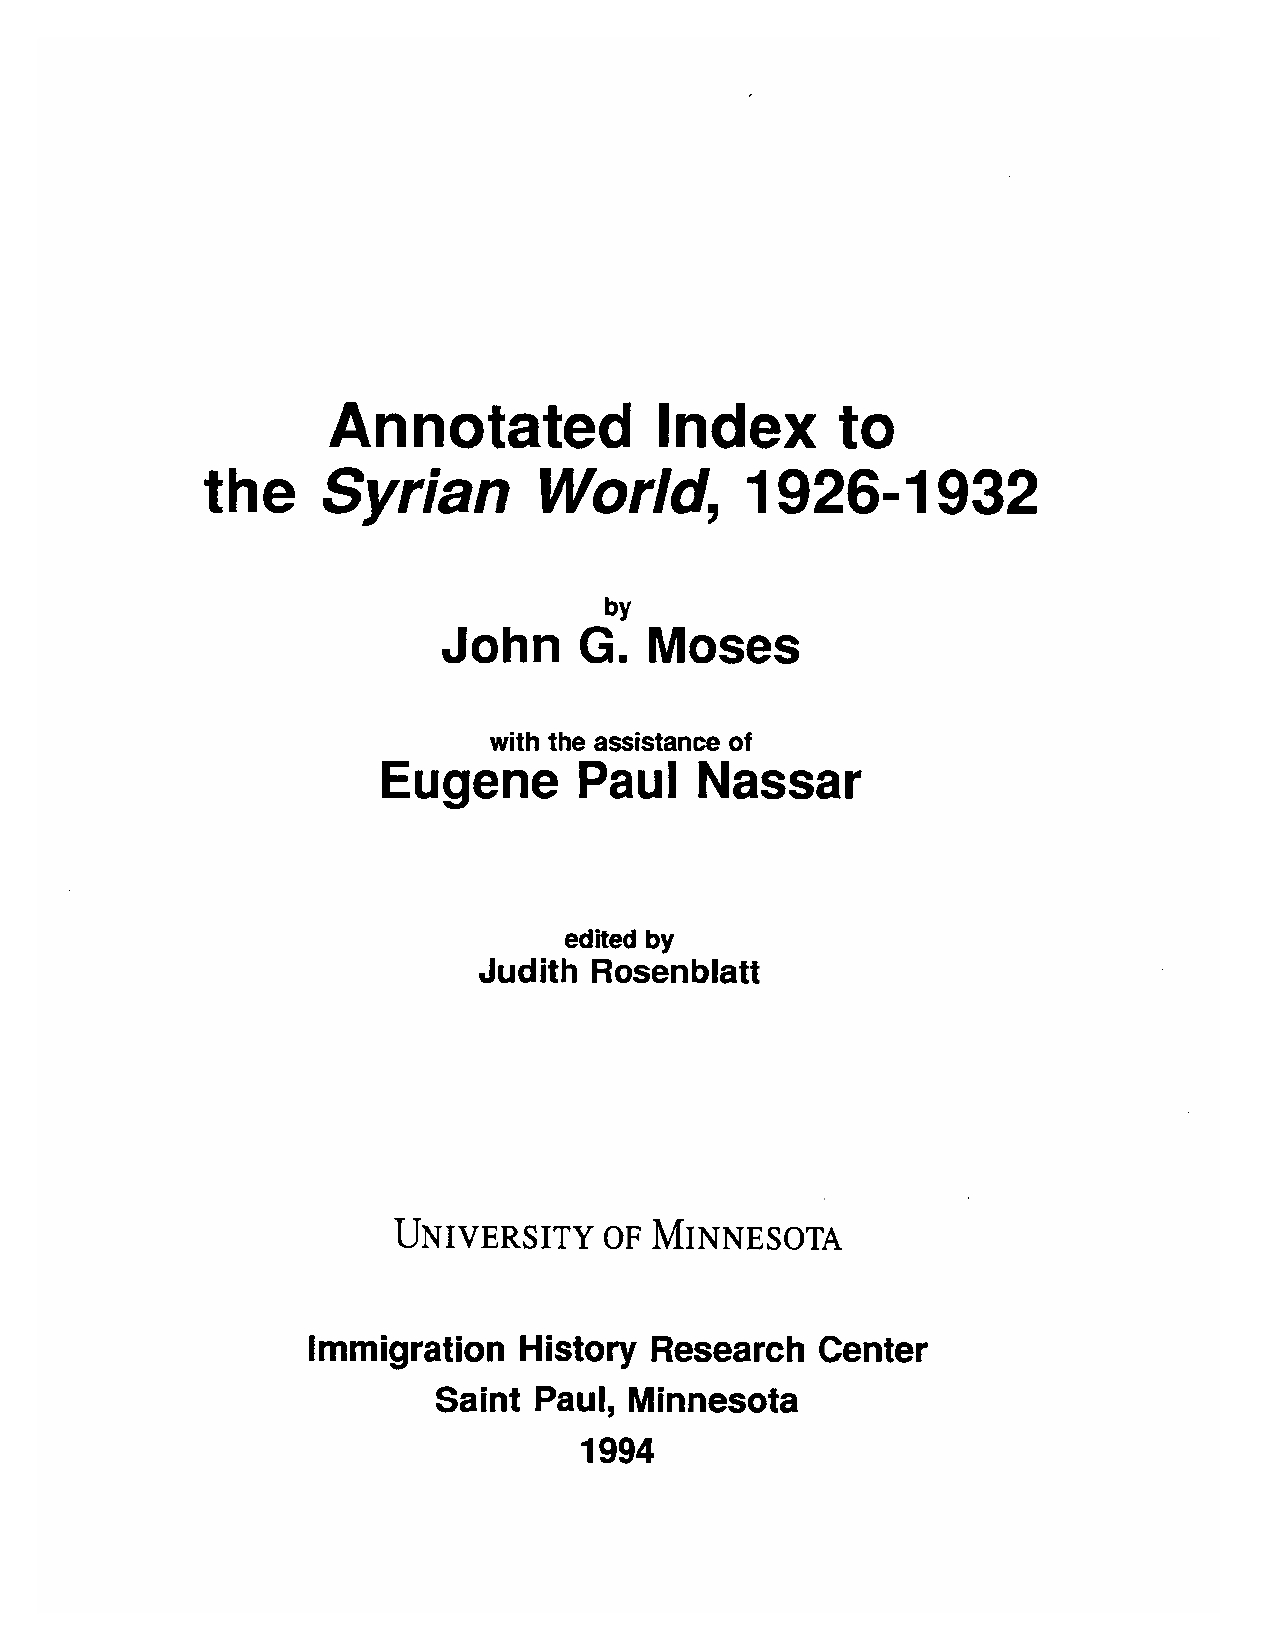 Annotated Index to The Syrian World, 1926-1932, with the assistance of Eugene Paul Nassar, edited by Judith Rosenblatt, Saint Paul, Minnesota: University of Minnesota - Immigration History Research Center, 1994.